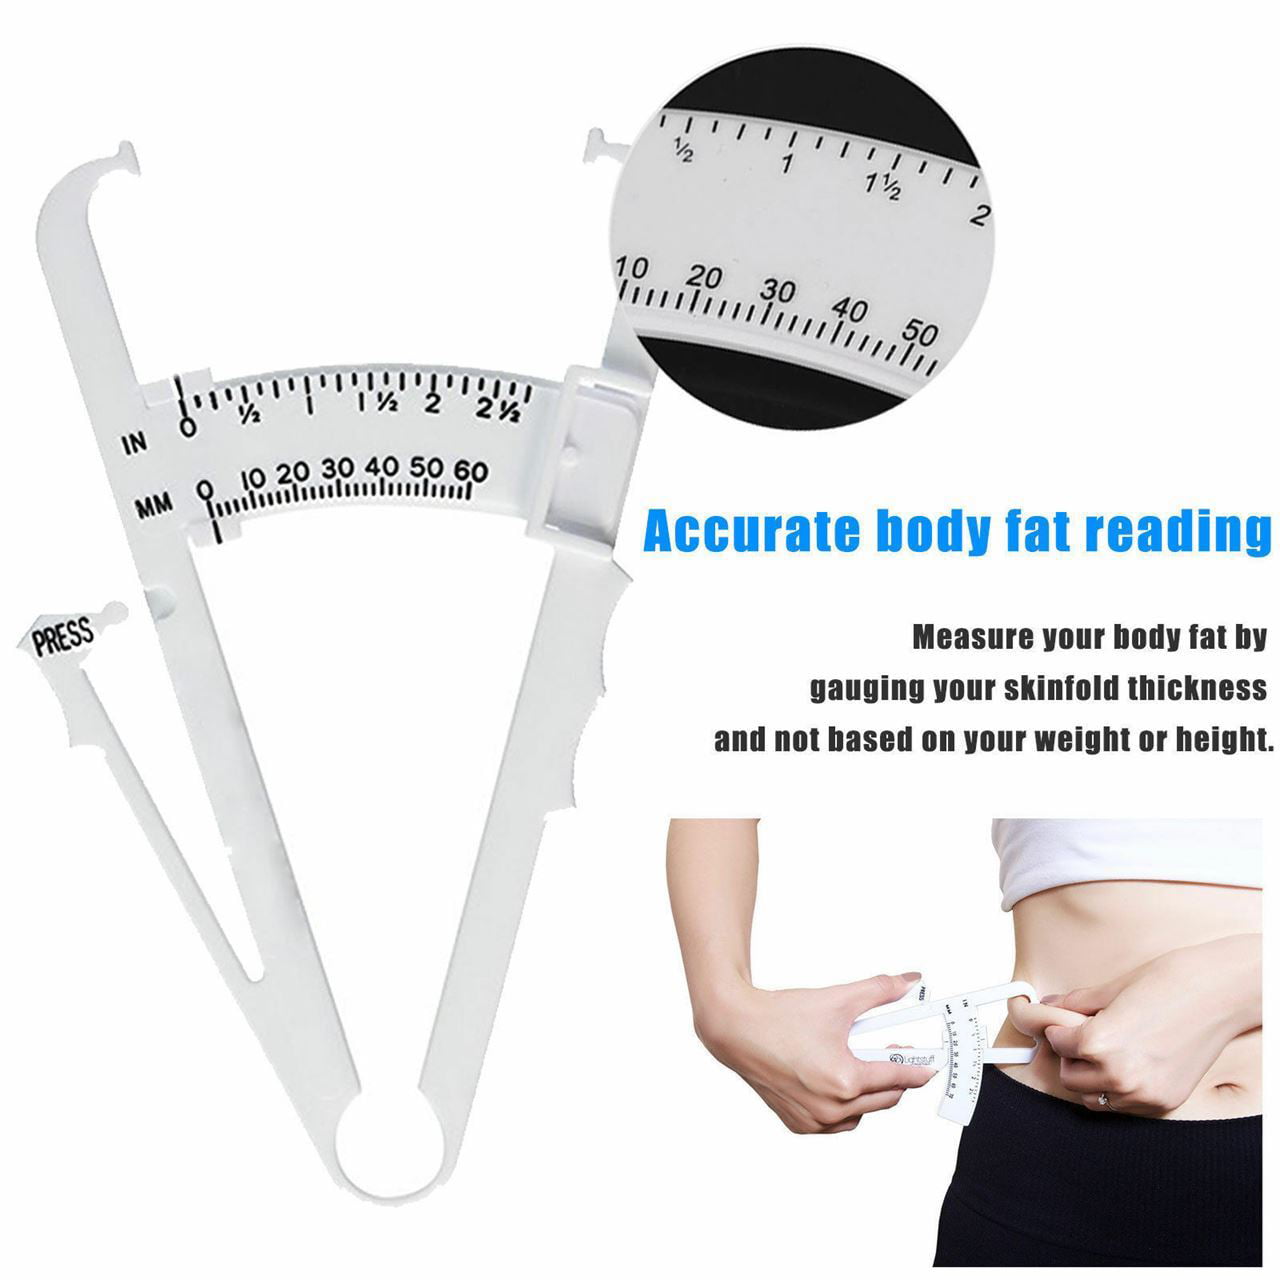 2pc Body Fat Caliper & Mass Measuring Tape Tester Skinfold Fitness Weight Loss 